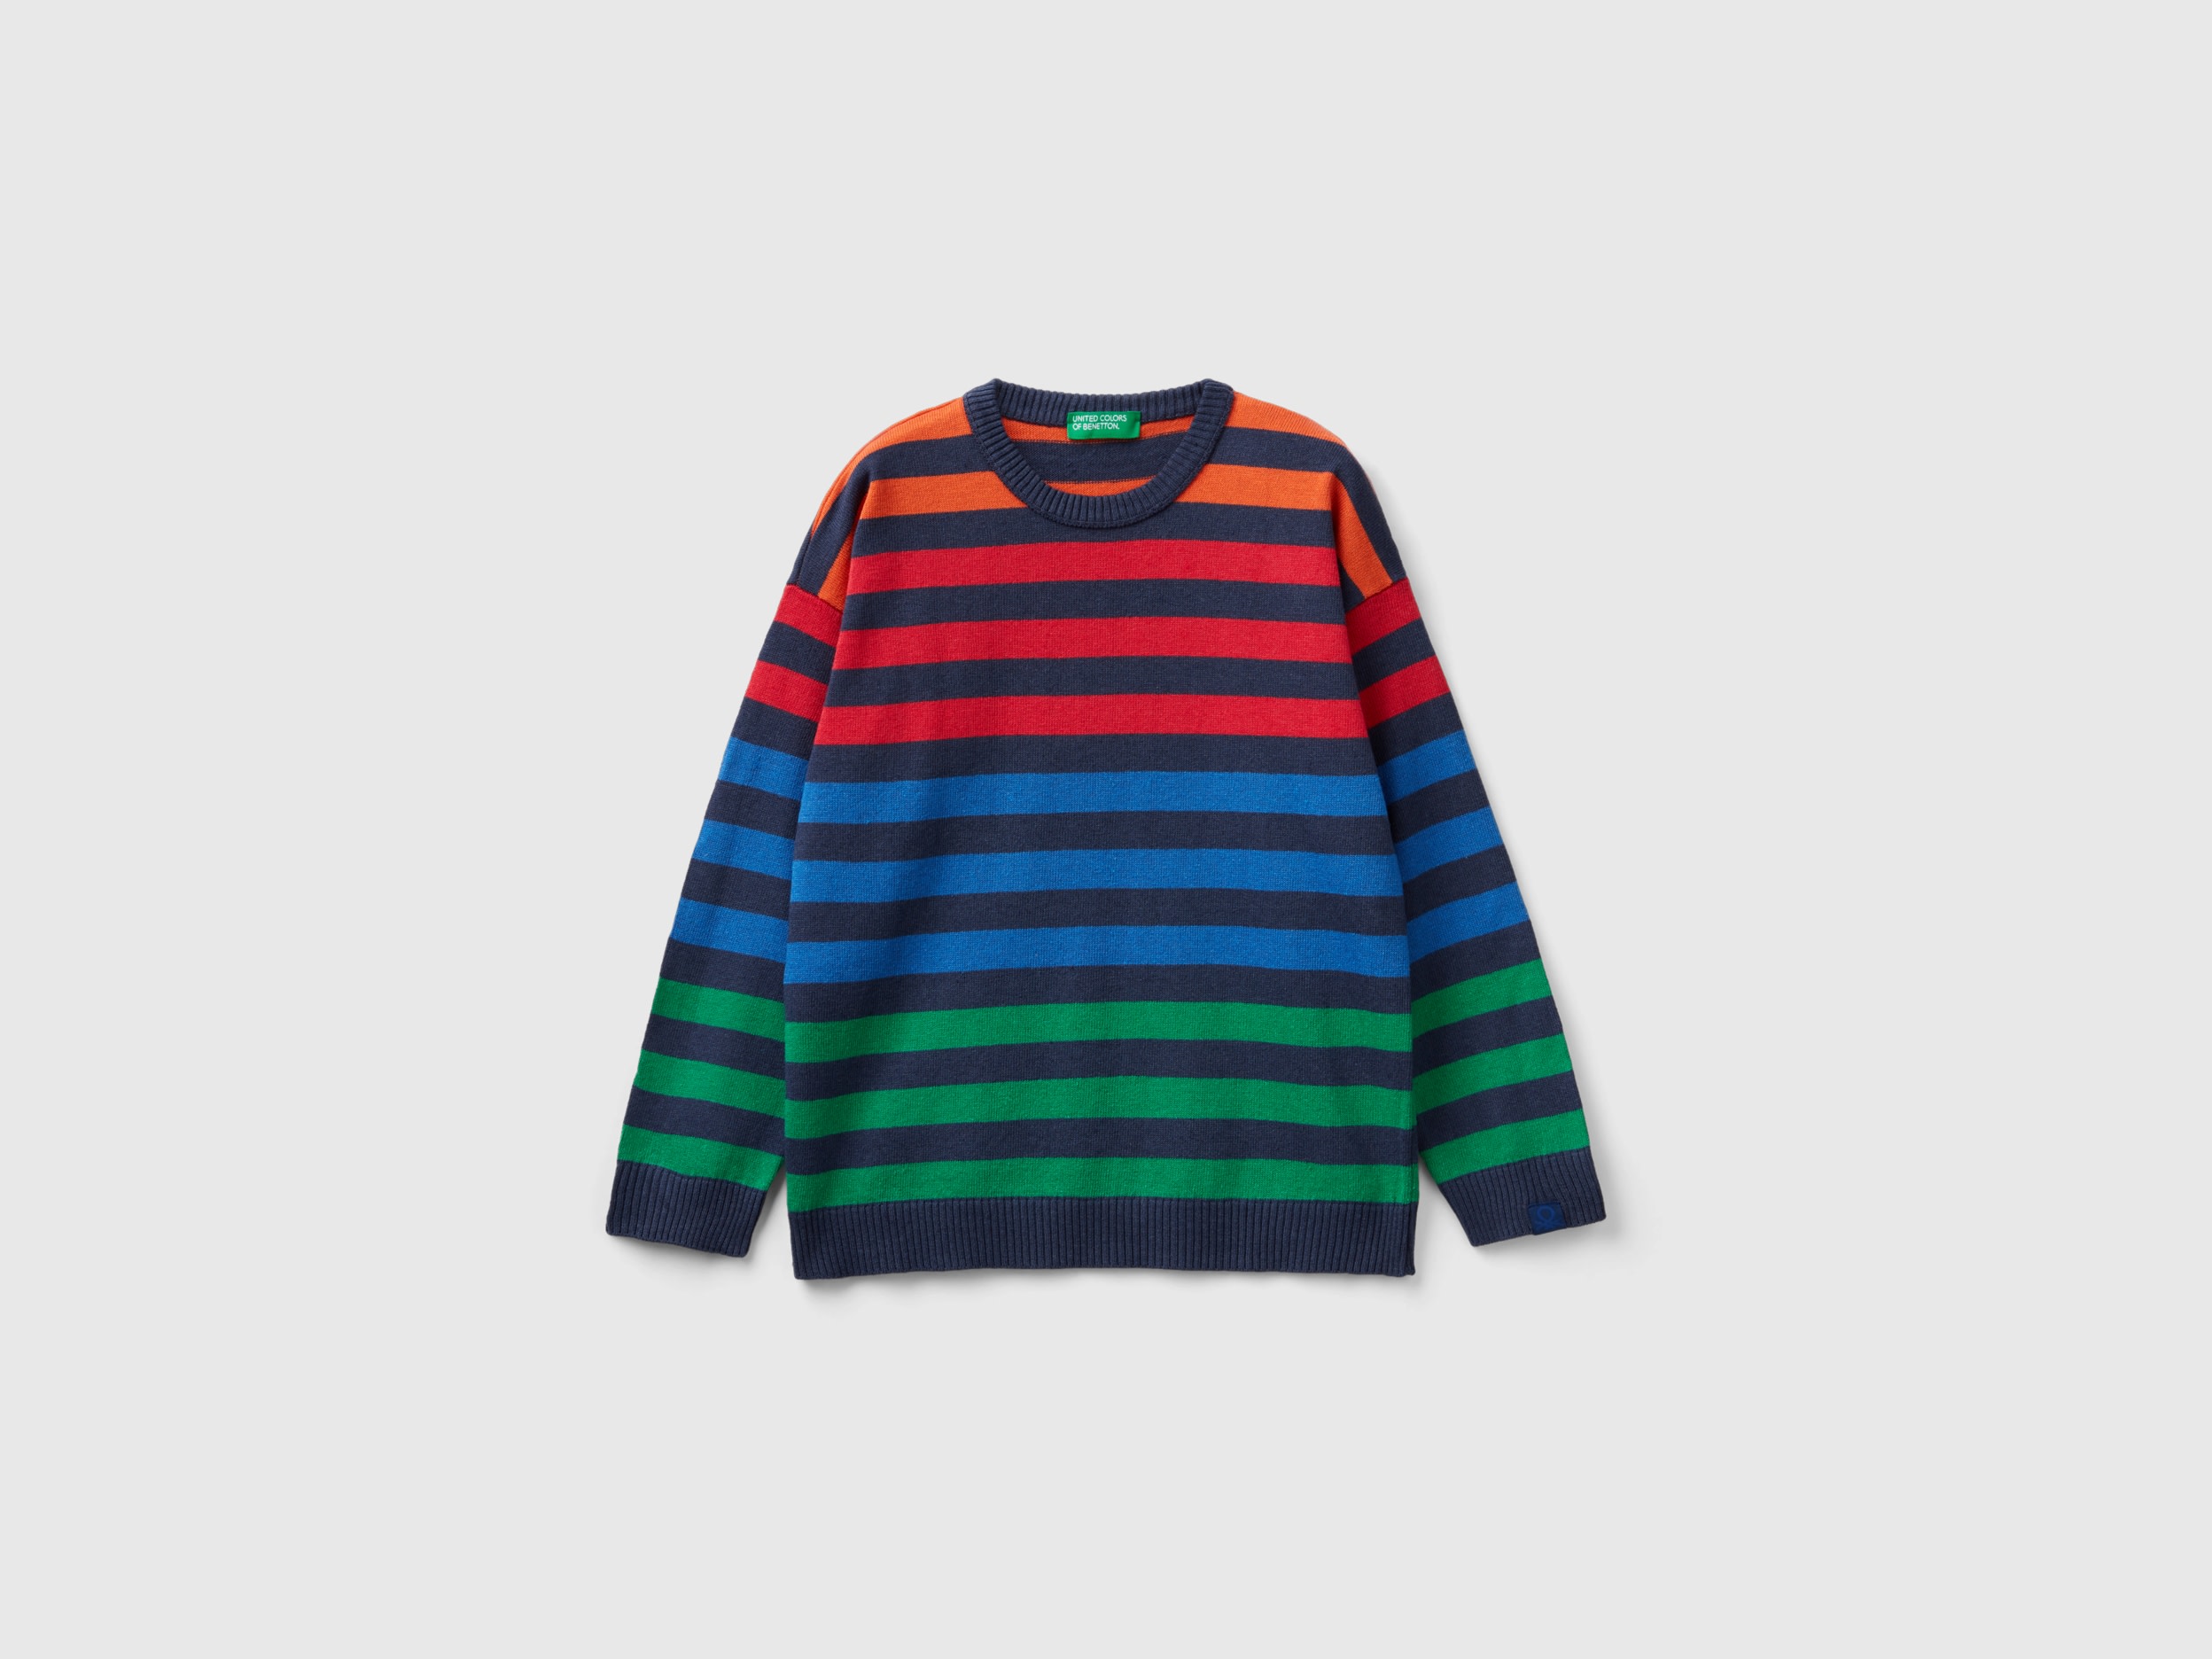 Image of Benetton, Striped Sweater, size M, Multi-color, Kids